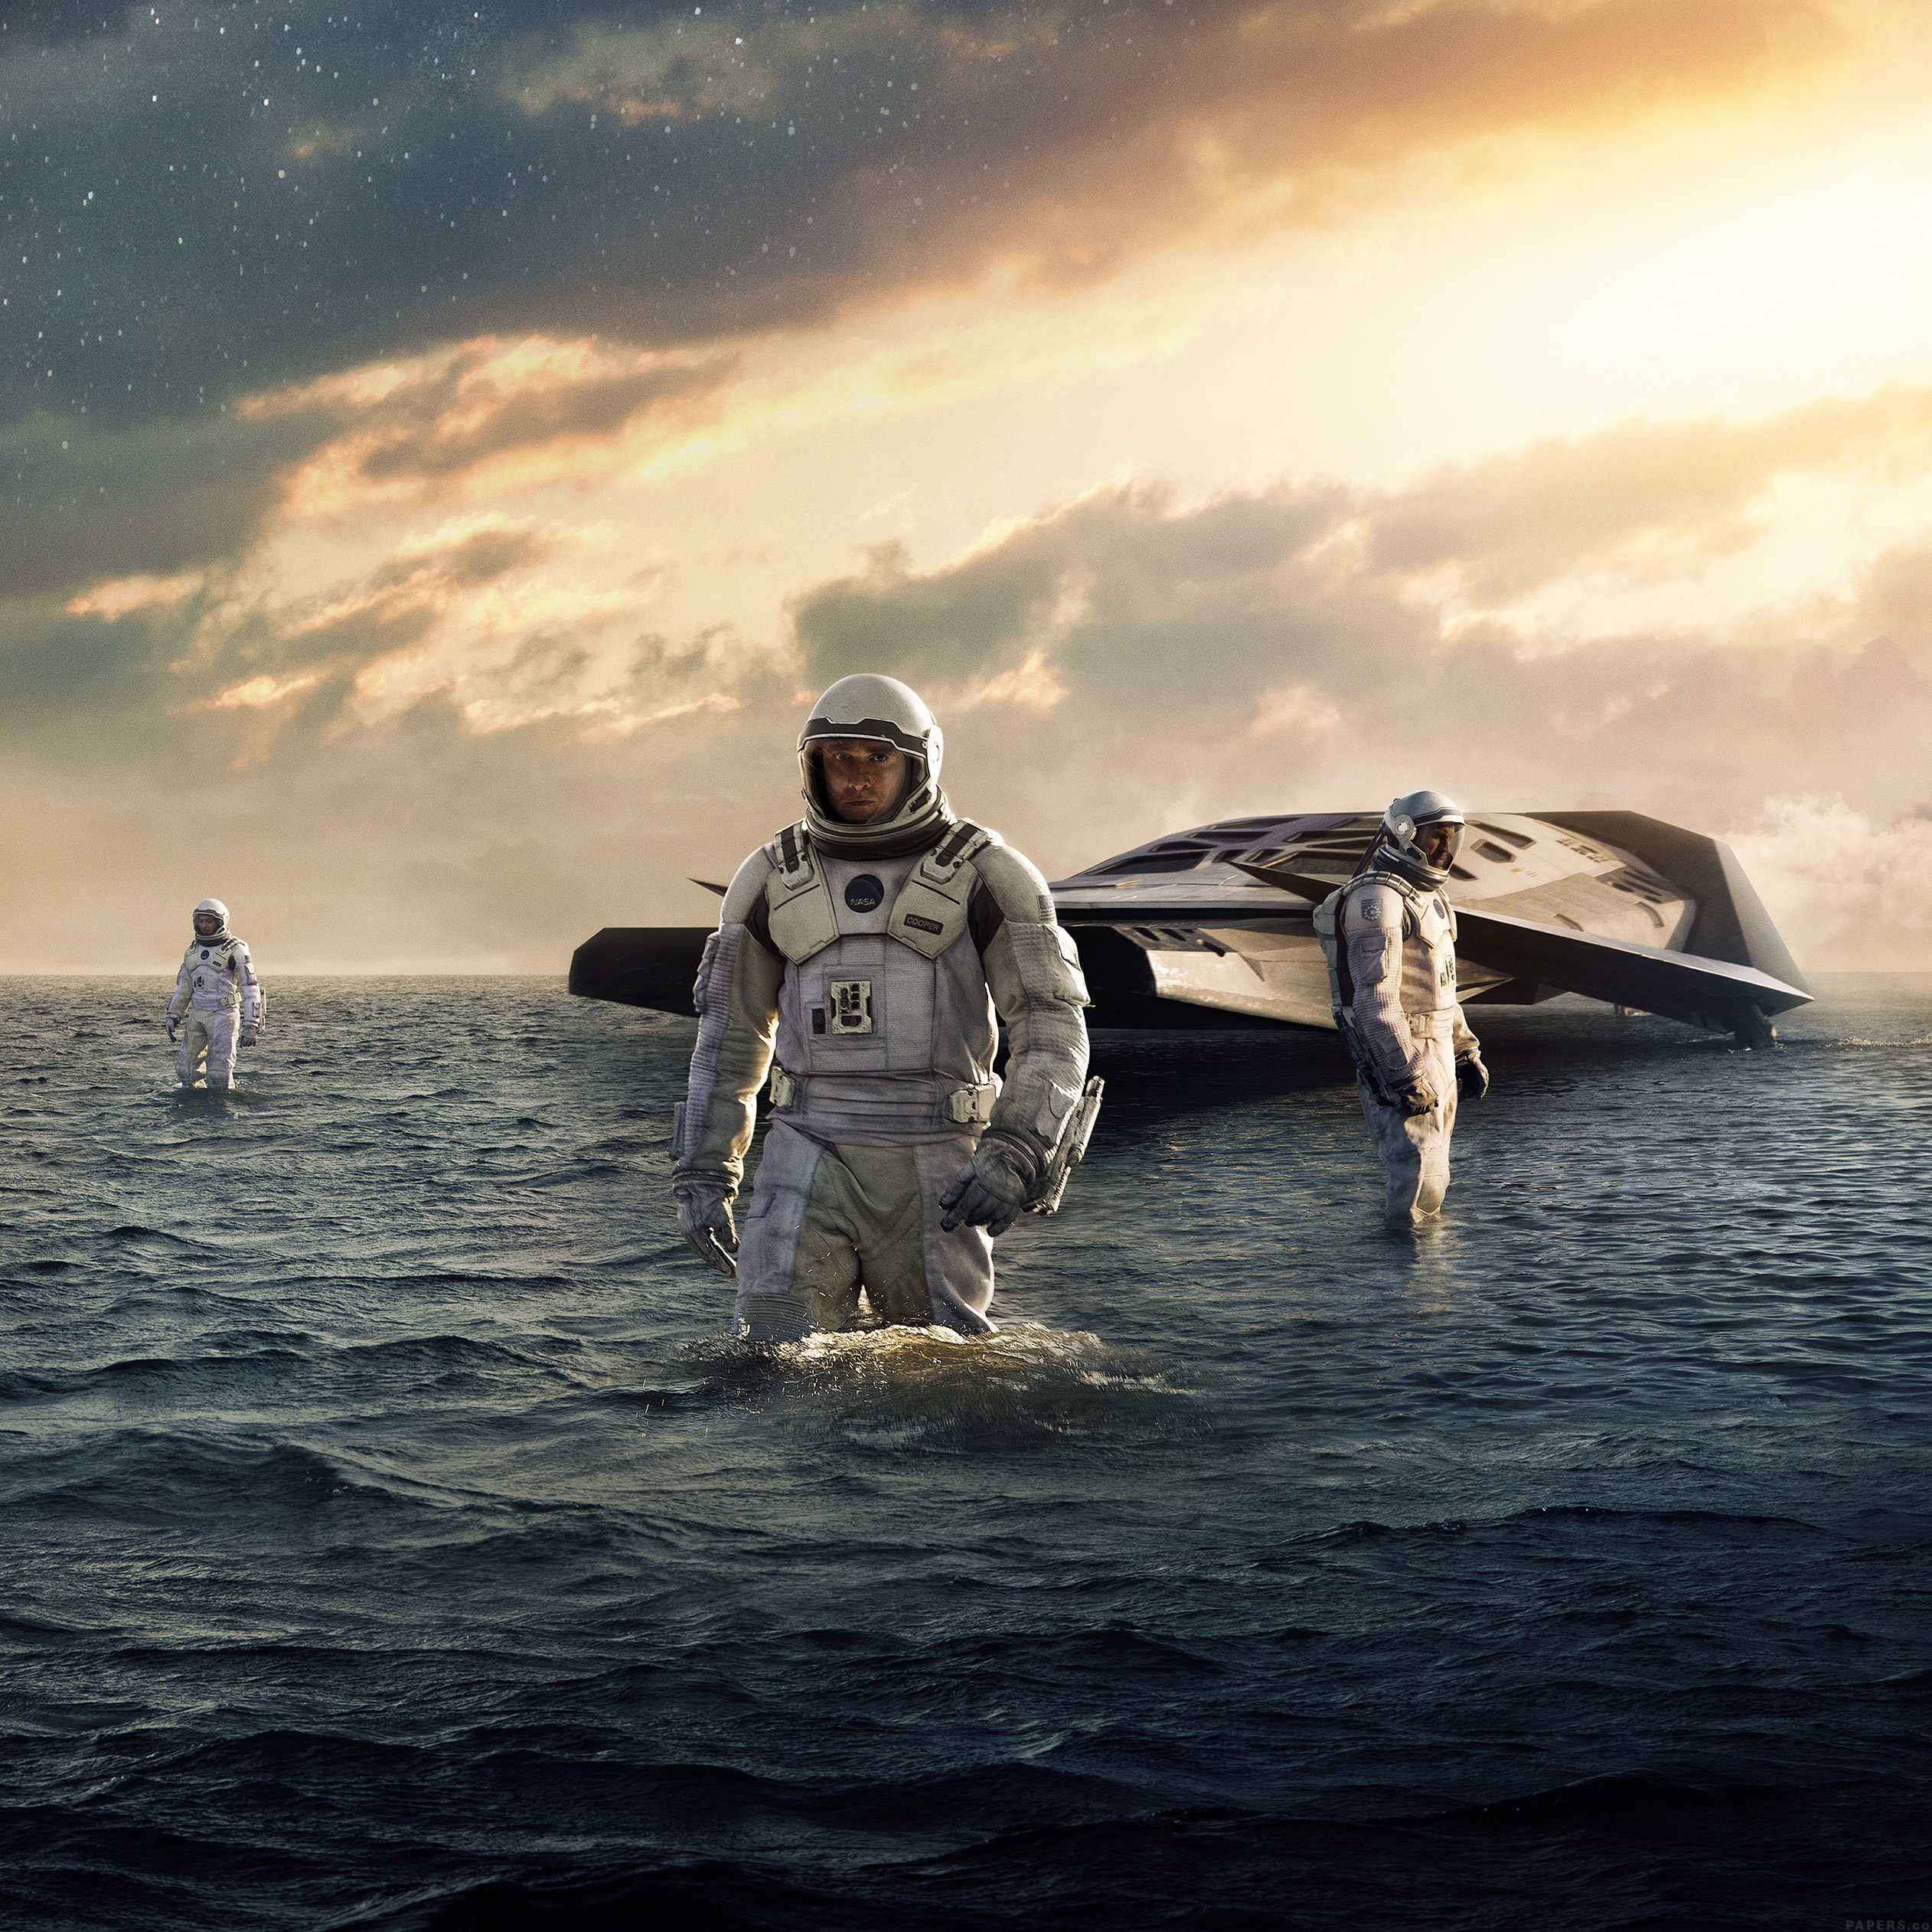 Interstellar wallpapers for iPhone and iPad